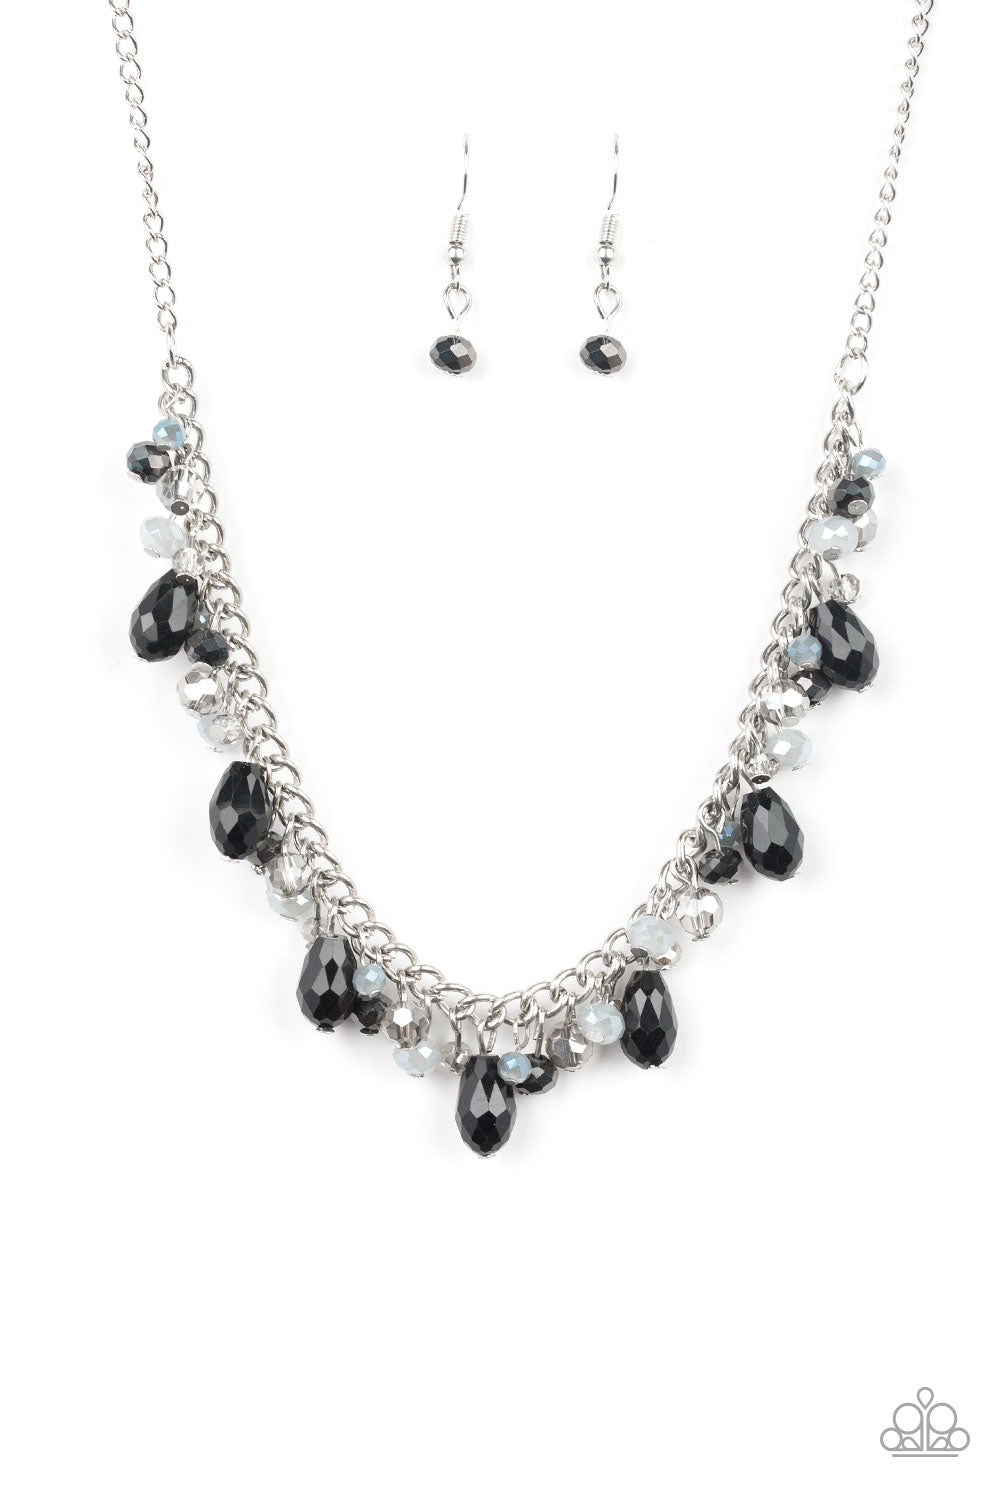 pittmanbling-and-jewelry-inc-presentscourageously-catwalk-multi-necklace-paparazzi-accessories